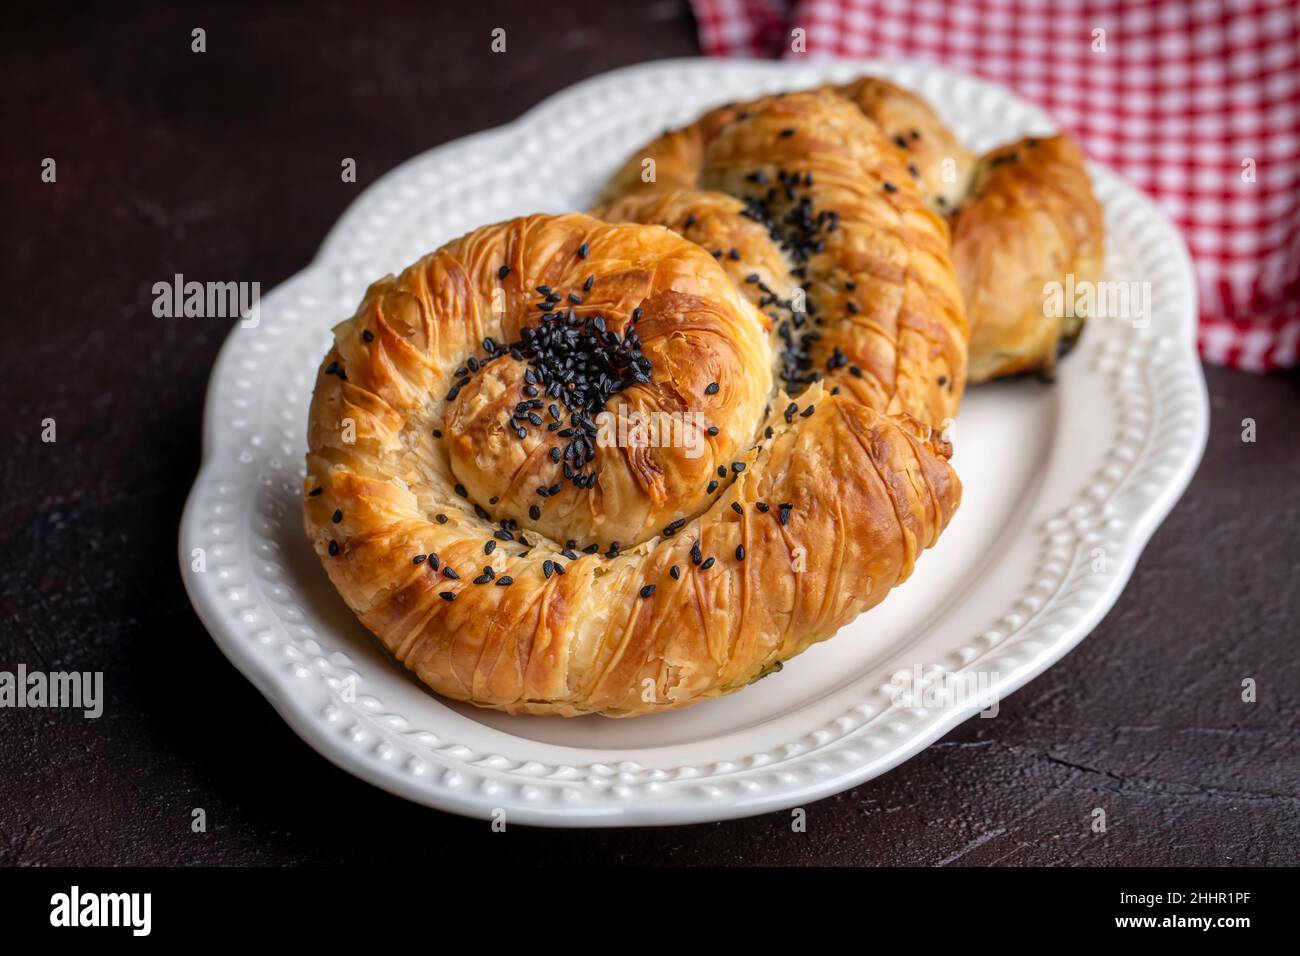 Traditional delicious Turkish phyllo stuffed with spinach, cheese (Turkish name; Gul borek or gul boregi) Rose shaped pastry. Stock Photo